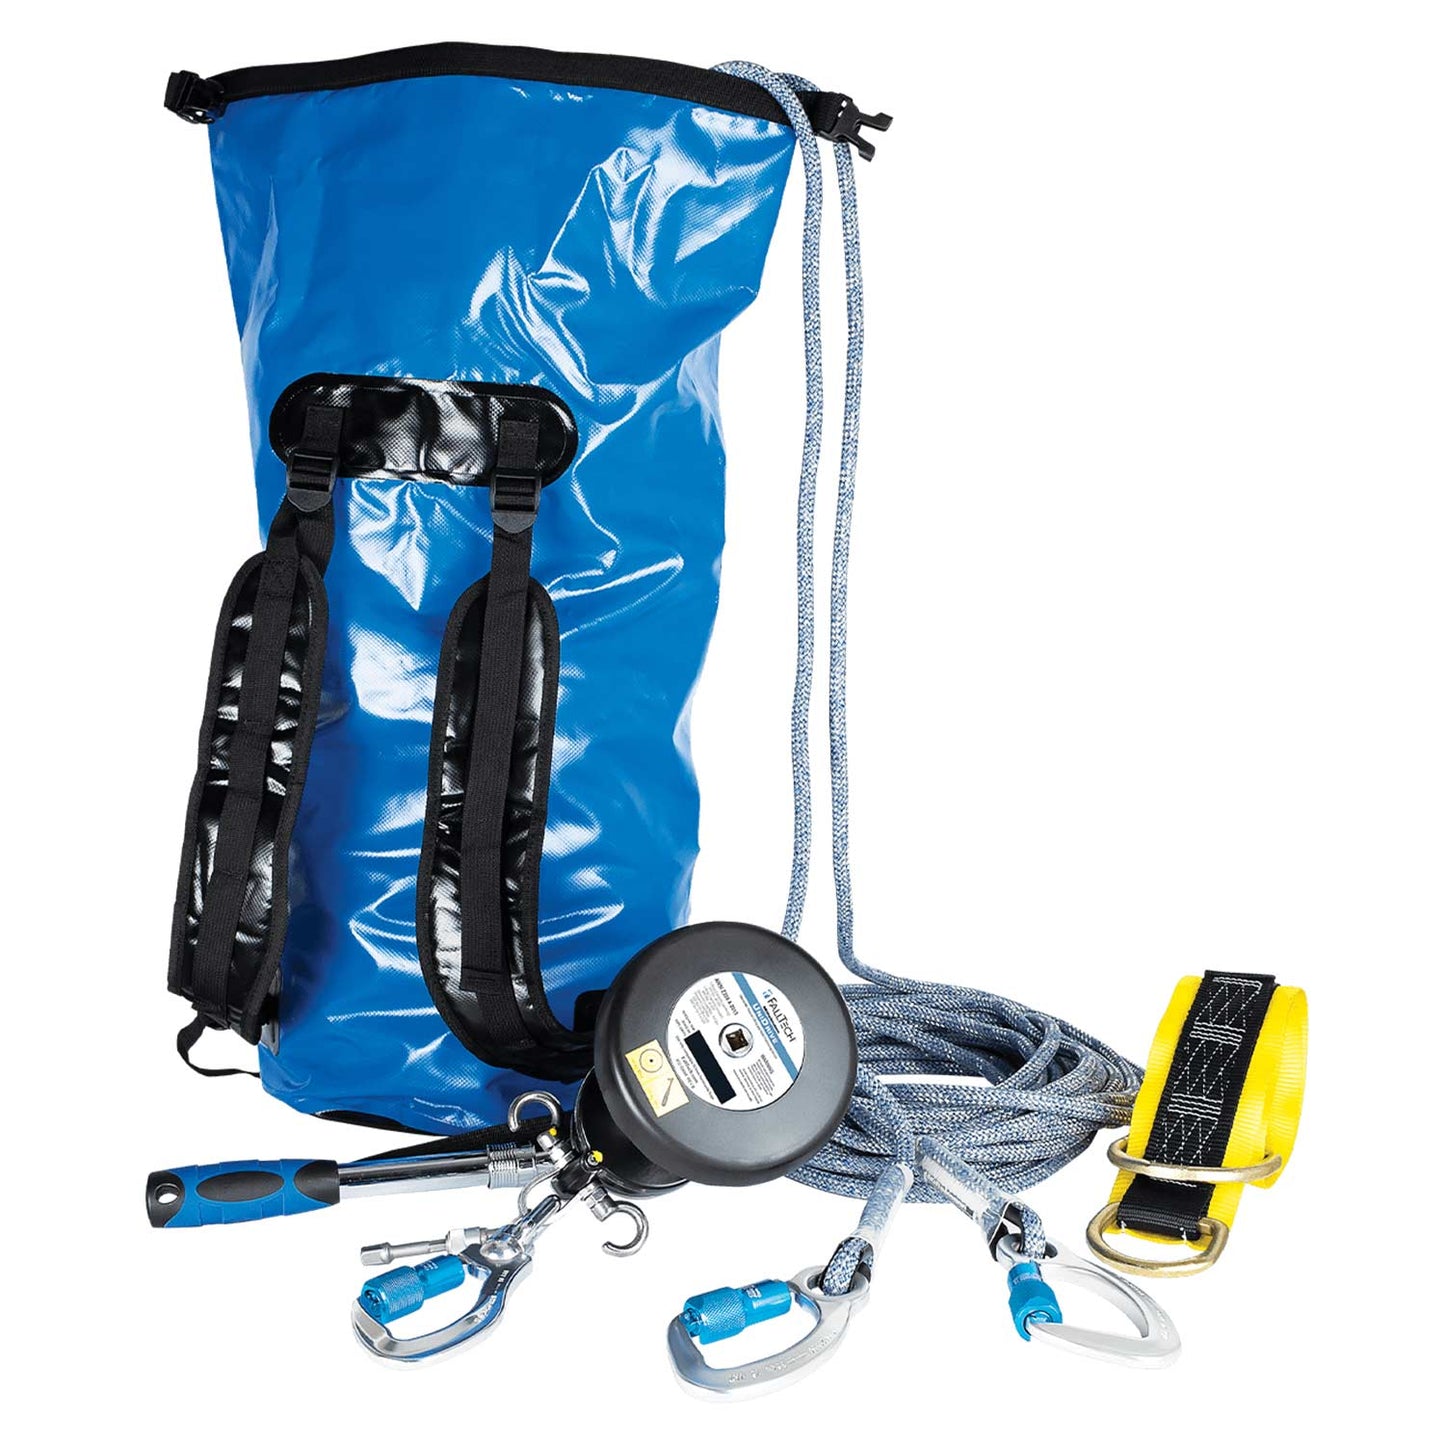 FallTech 150' Fall Protection Rescue Equipment Kit with Bag | 6814150K